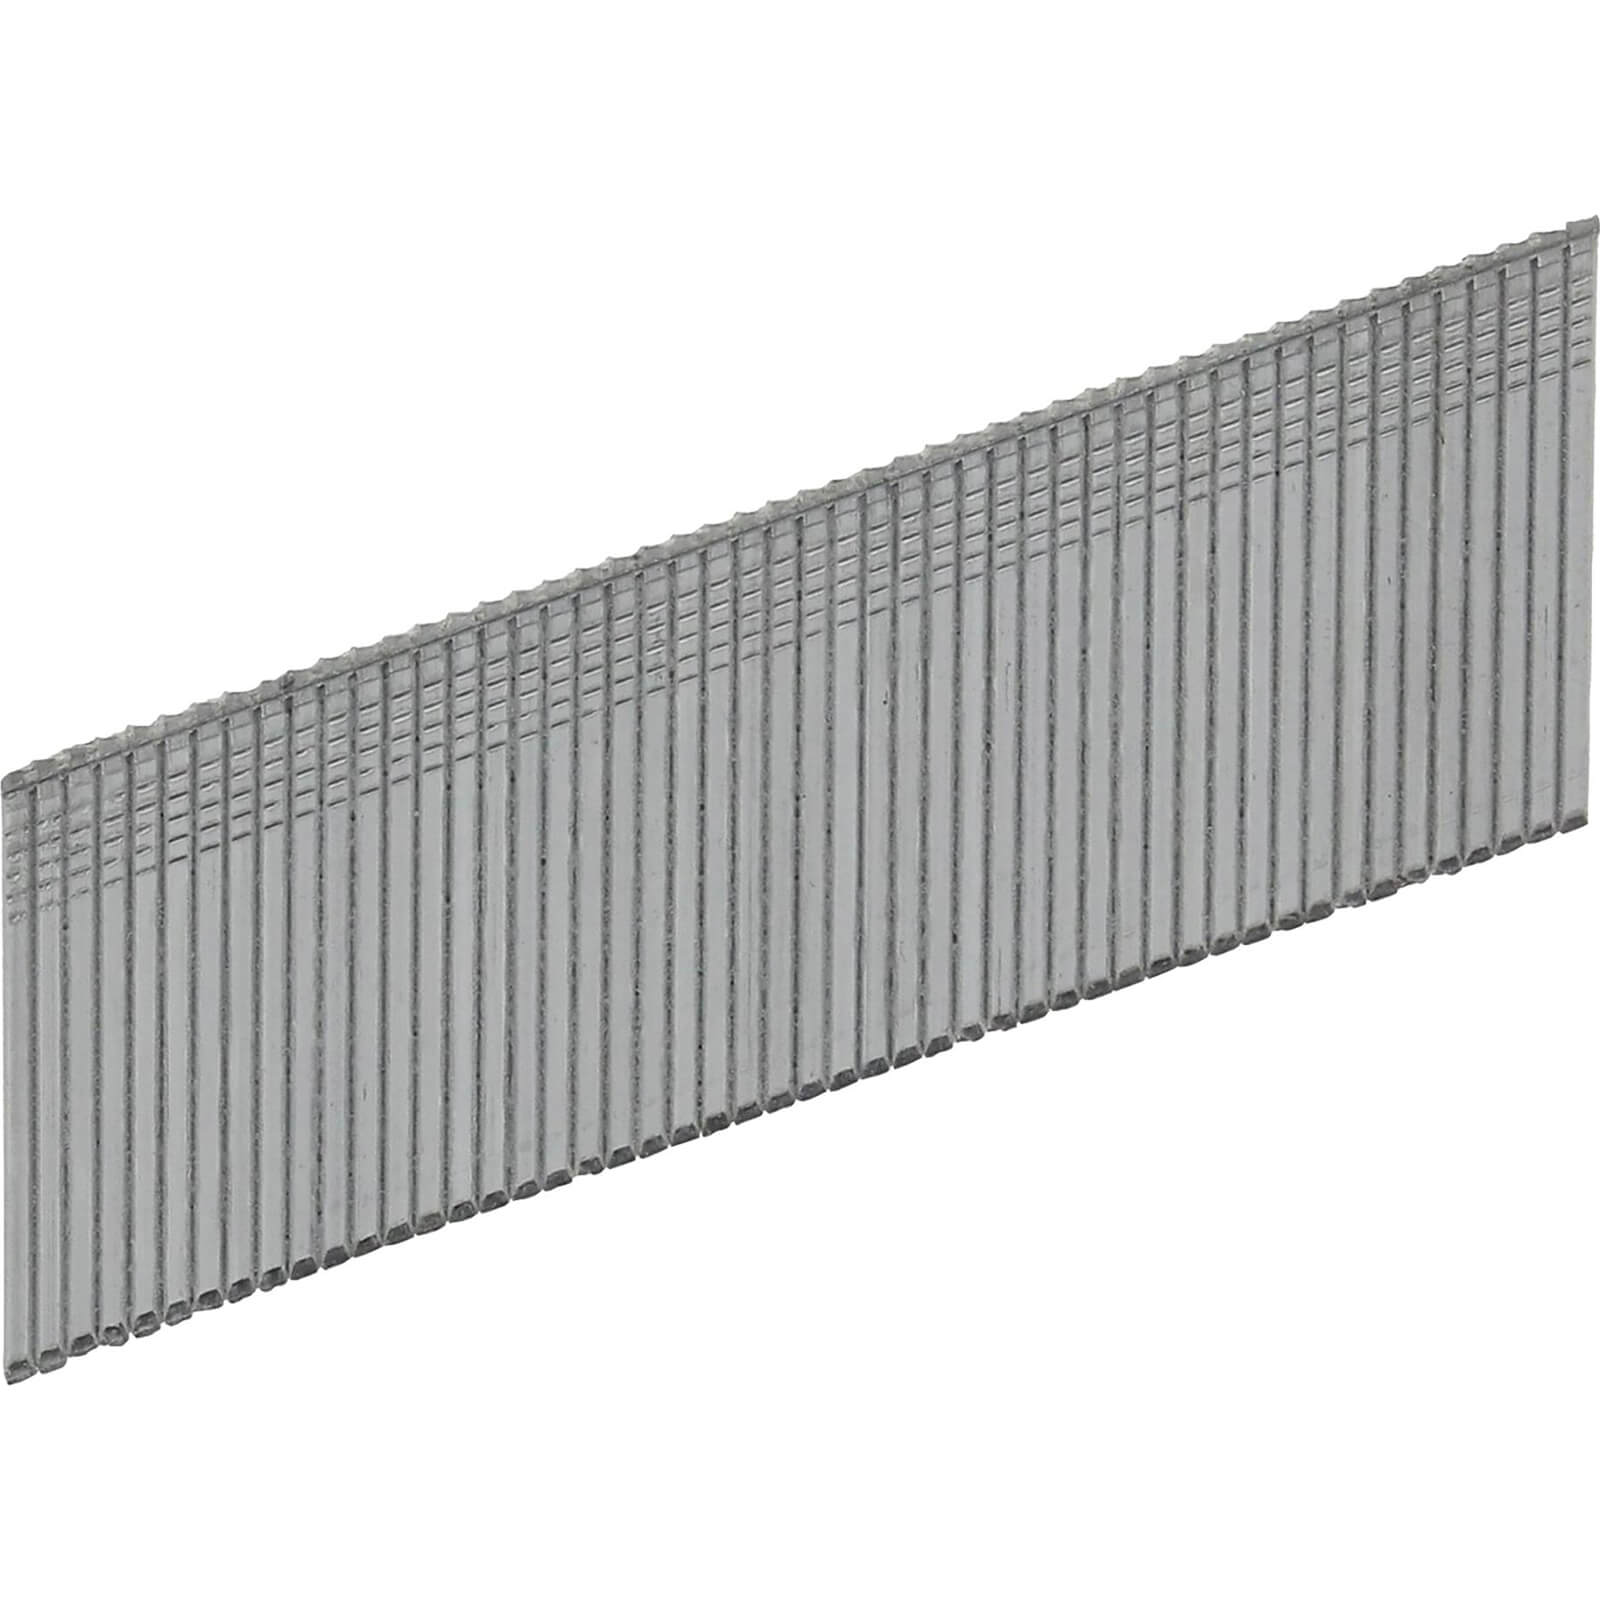 Paslode F18 x 32mm Electro Galvanised Brad Nails Pack of 2000 for IM50 & IM200 Nail Guns